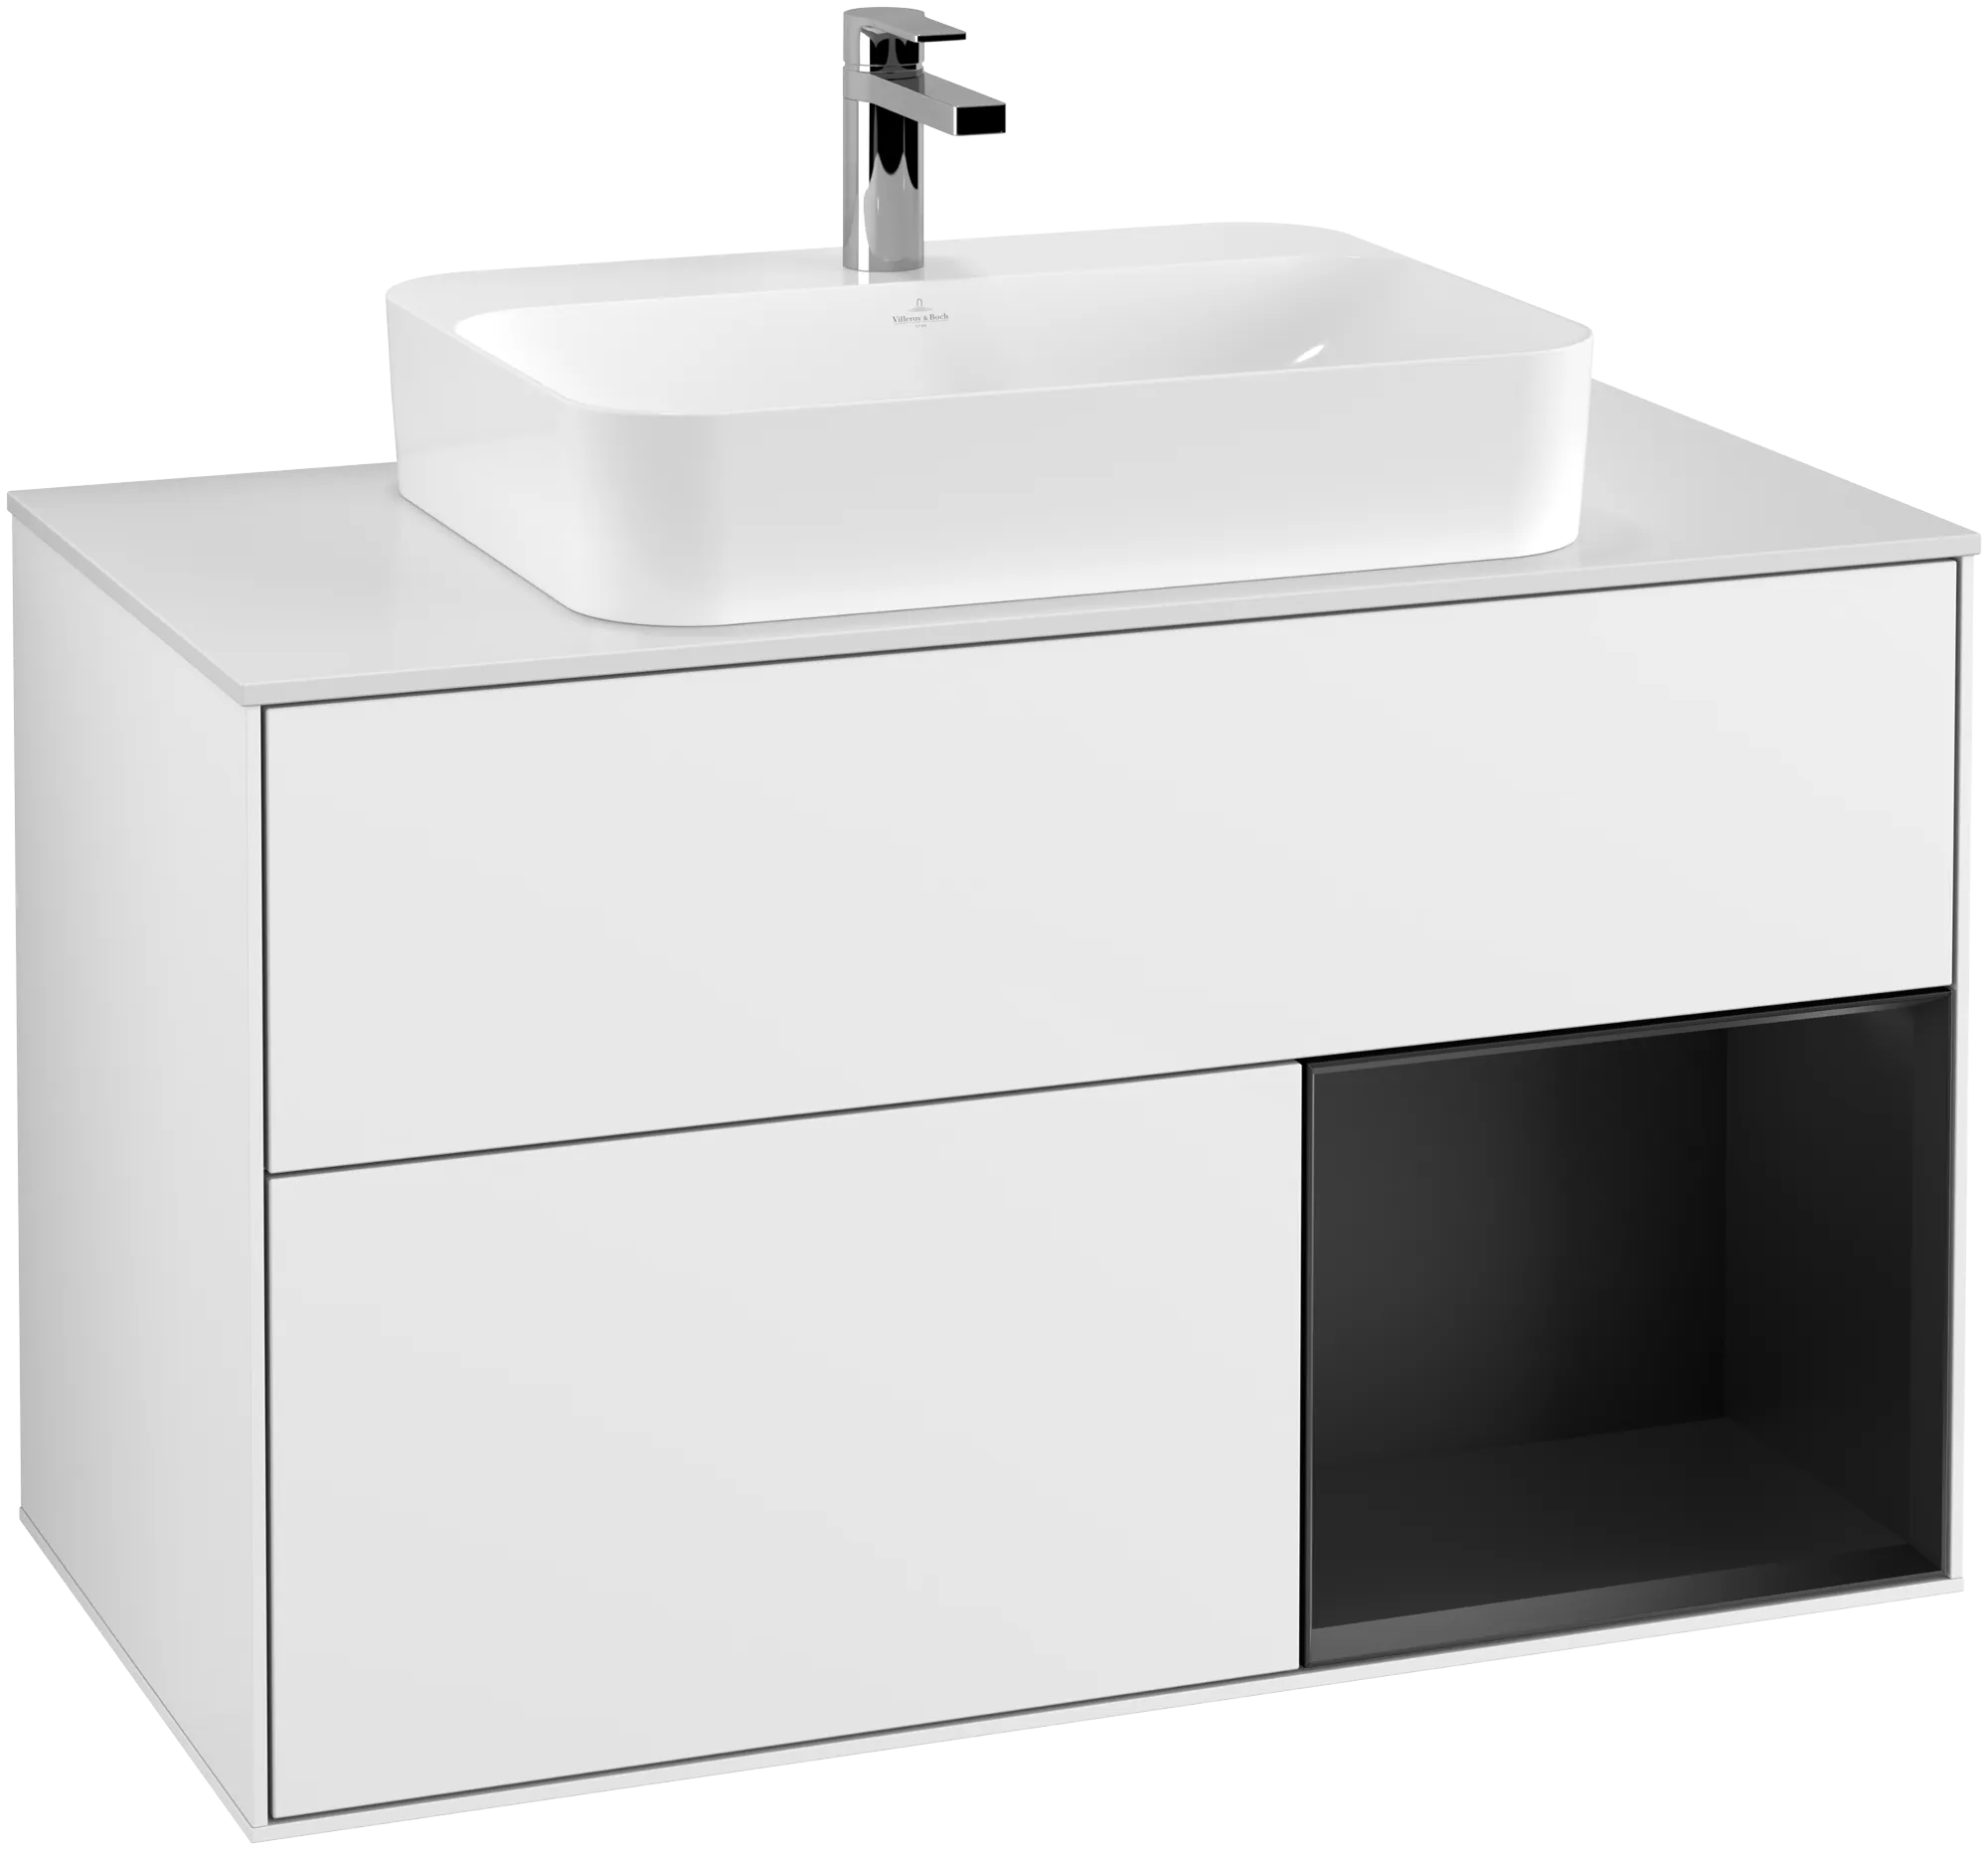 VILLEROY BOCH Finion Vanity unit, with lighting, 2 pull-out compartments, 1000 x 603 x 501 mm, Glossy White Lacquer / Black Matt Lacquer / Glass White Matt #G371PDGF resmi